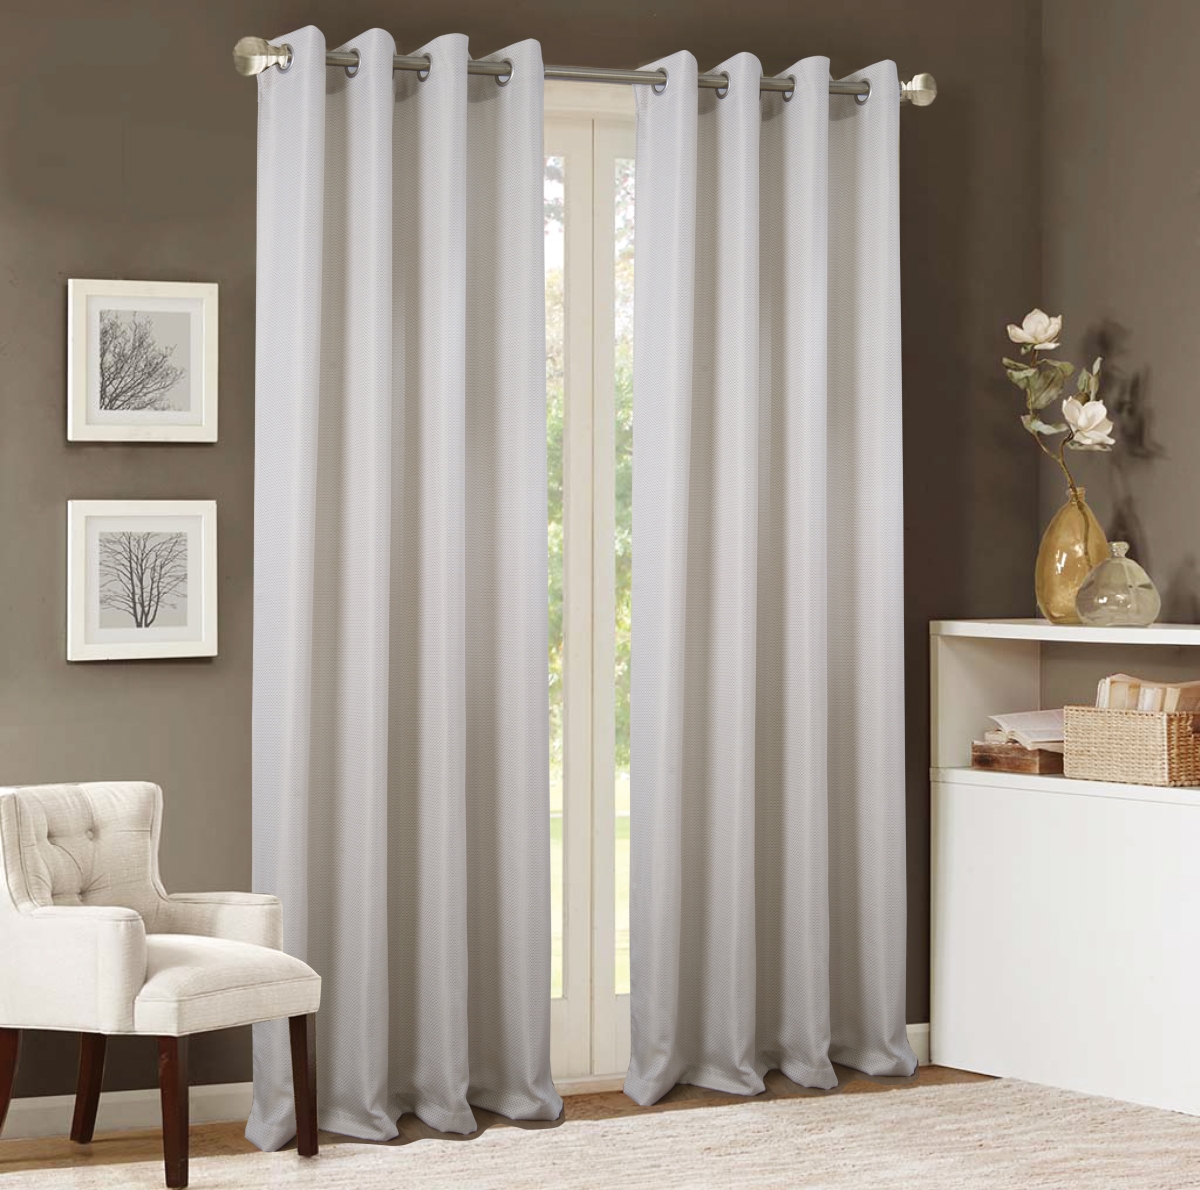 Pna22890 54 X 90 In. Akron Textured Jacquard Single Grommet Curtain Panel, Taupe